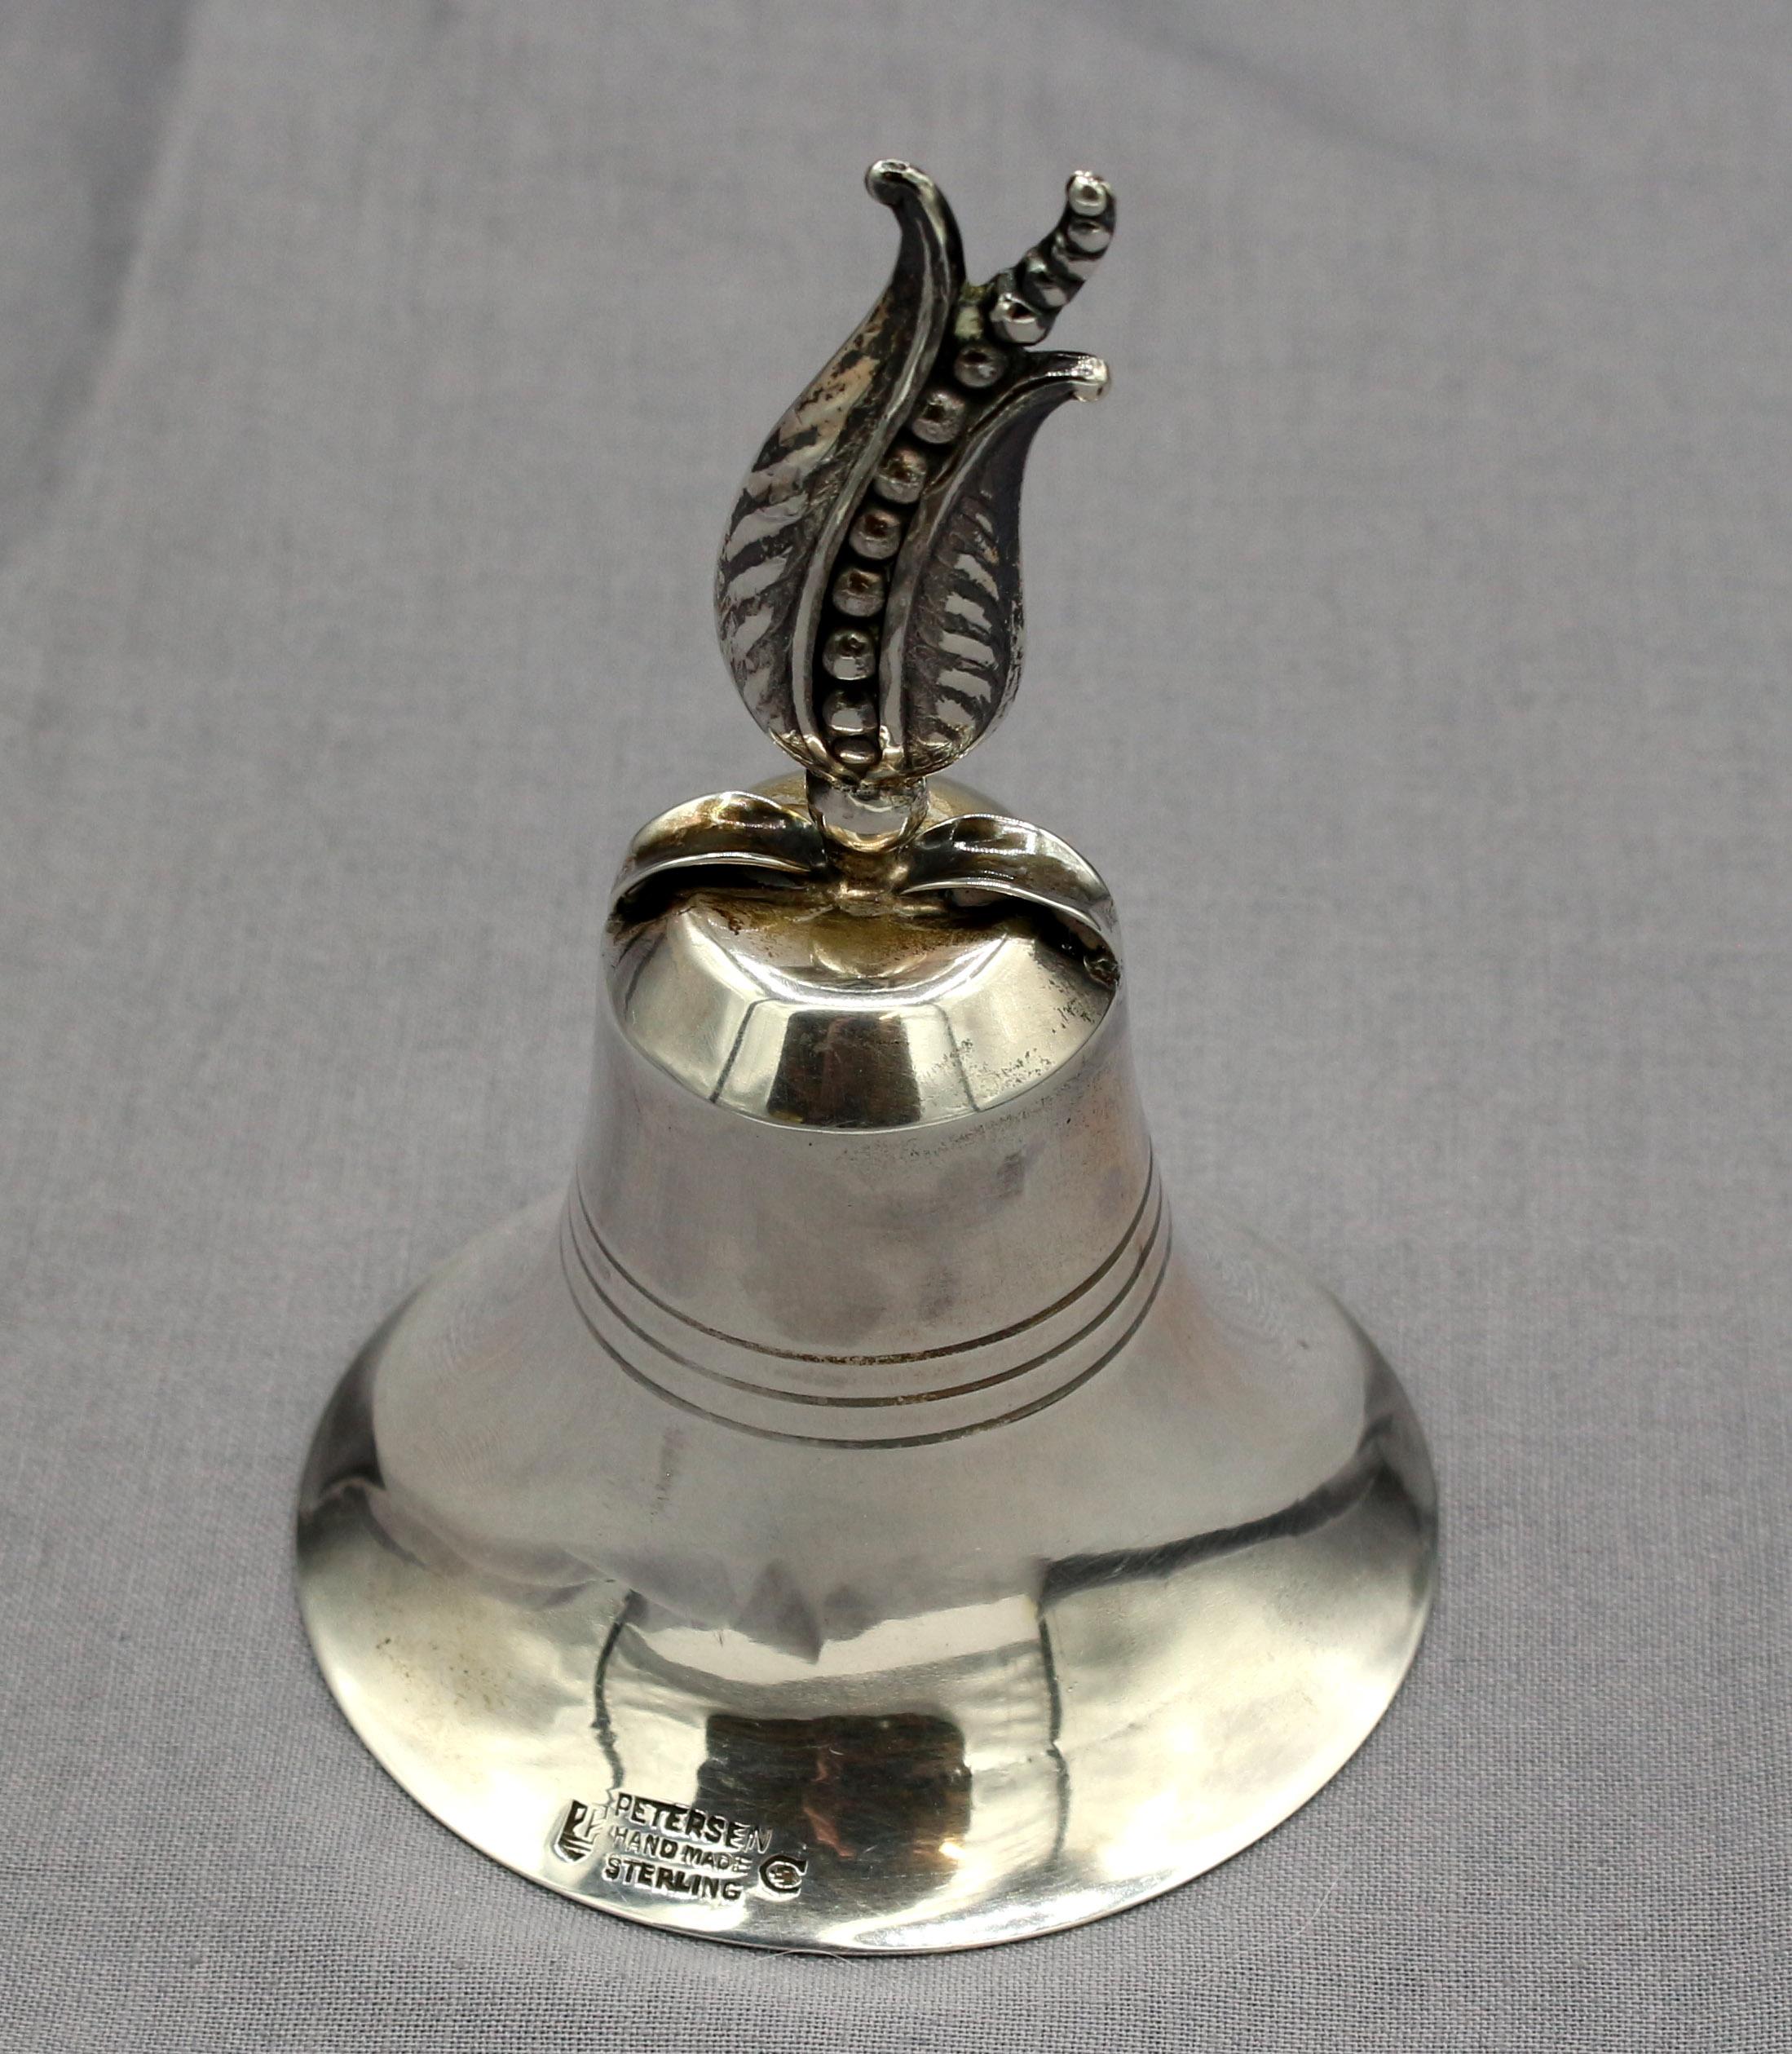 Circa 1950-70 sterling silver dinner bell by Carl Poul Petersen, Montreal, Canada. Mid century modern. Petersen apprenticed under Georg Jensen & married his daughter Ingrid. Fully marked. Hand made. Peapod handle. 1.50 troy oz. Estate of Linda